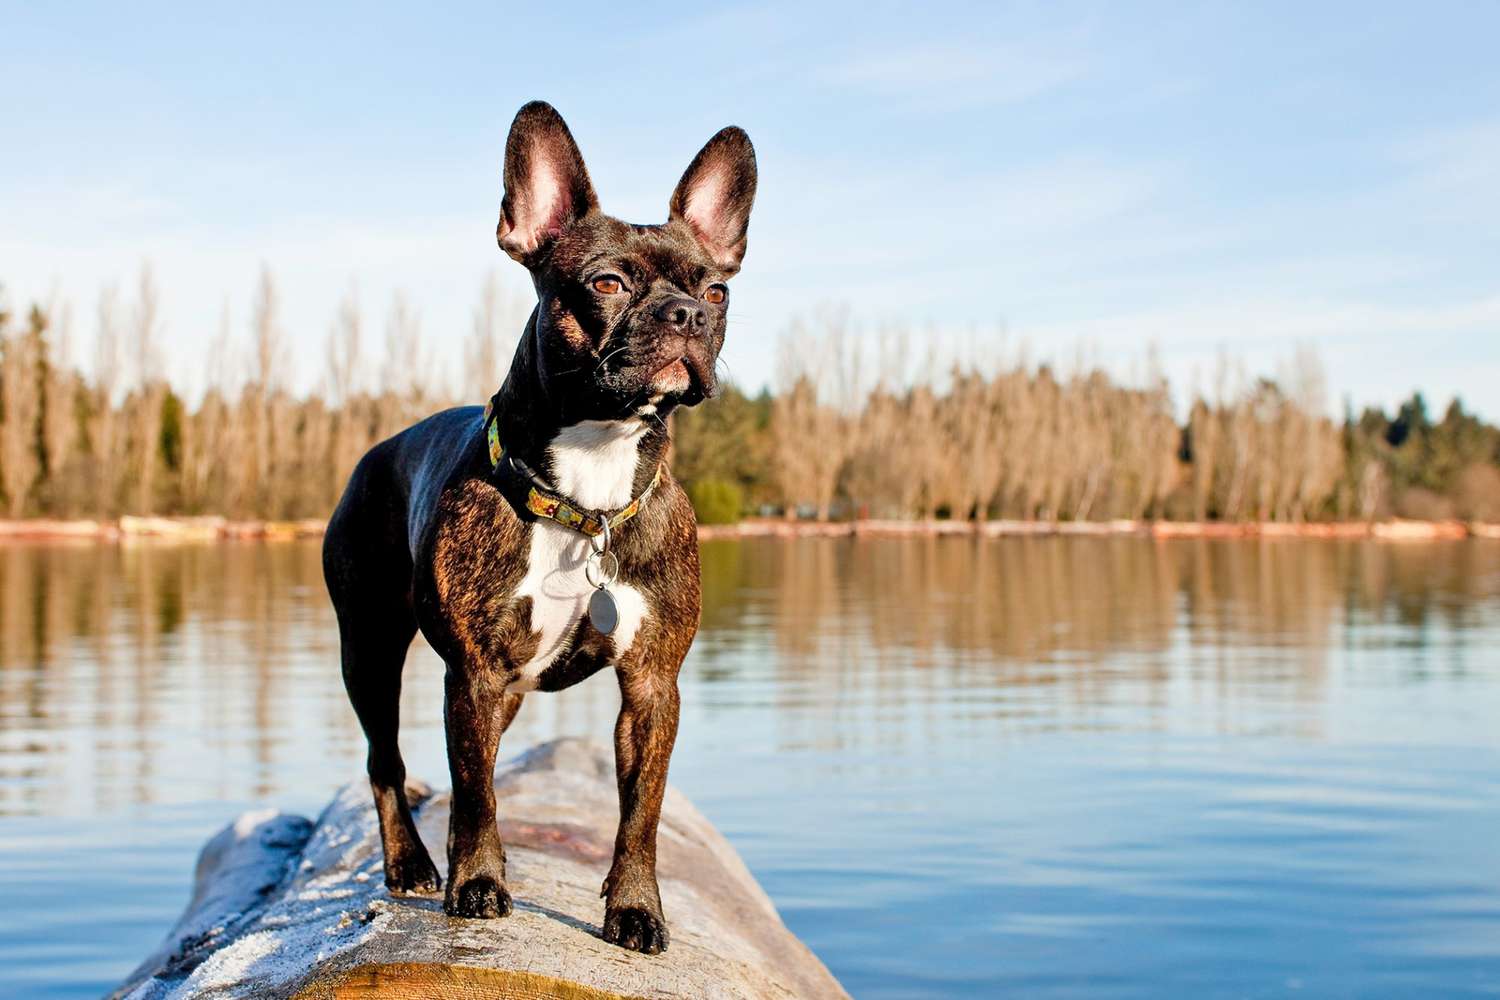 Brown Frenchton dog stands on log in lake during golden hour